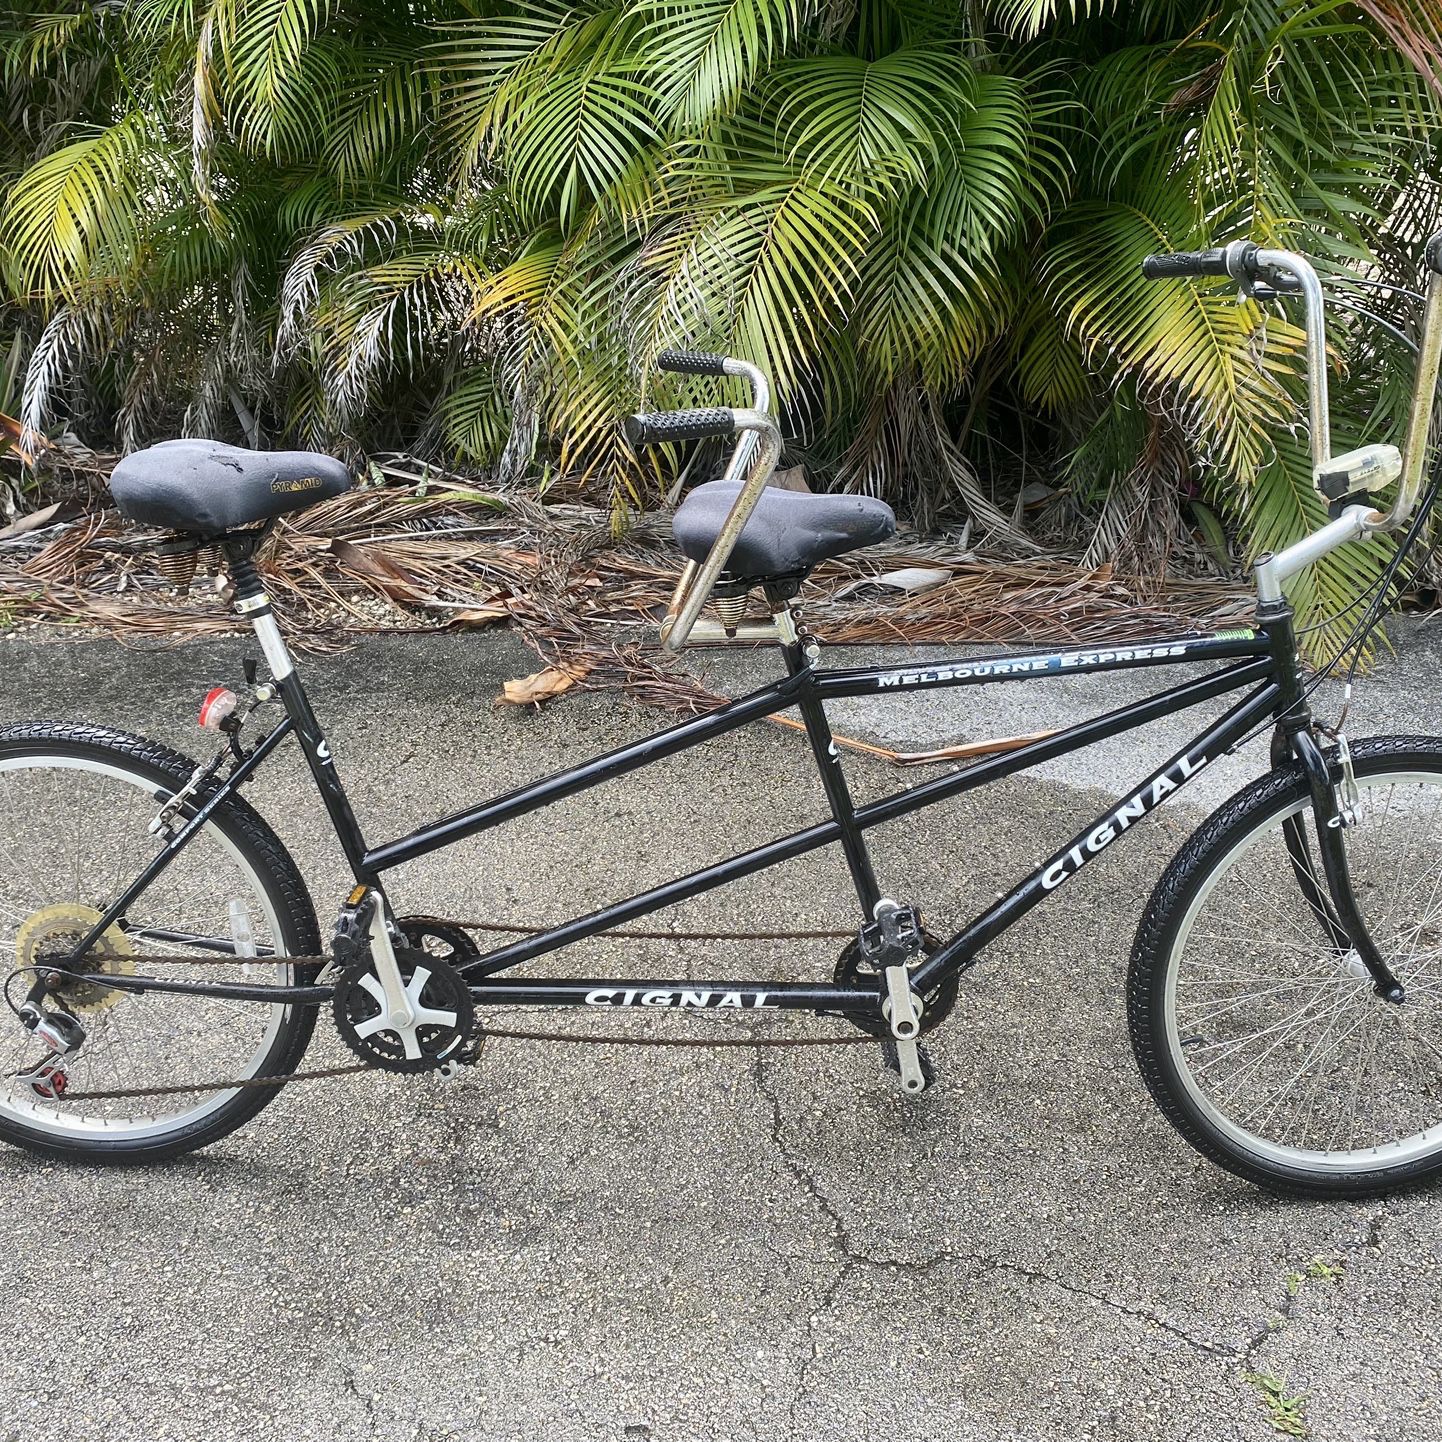 Duel Bicycle (Cignal Melbourne Express Bike)